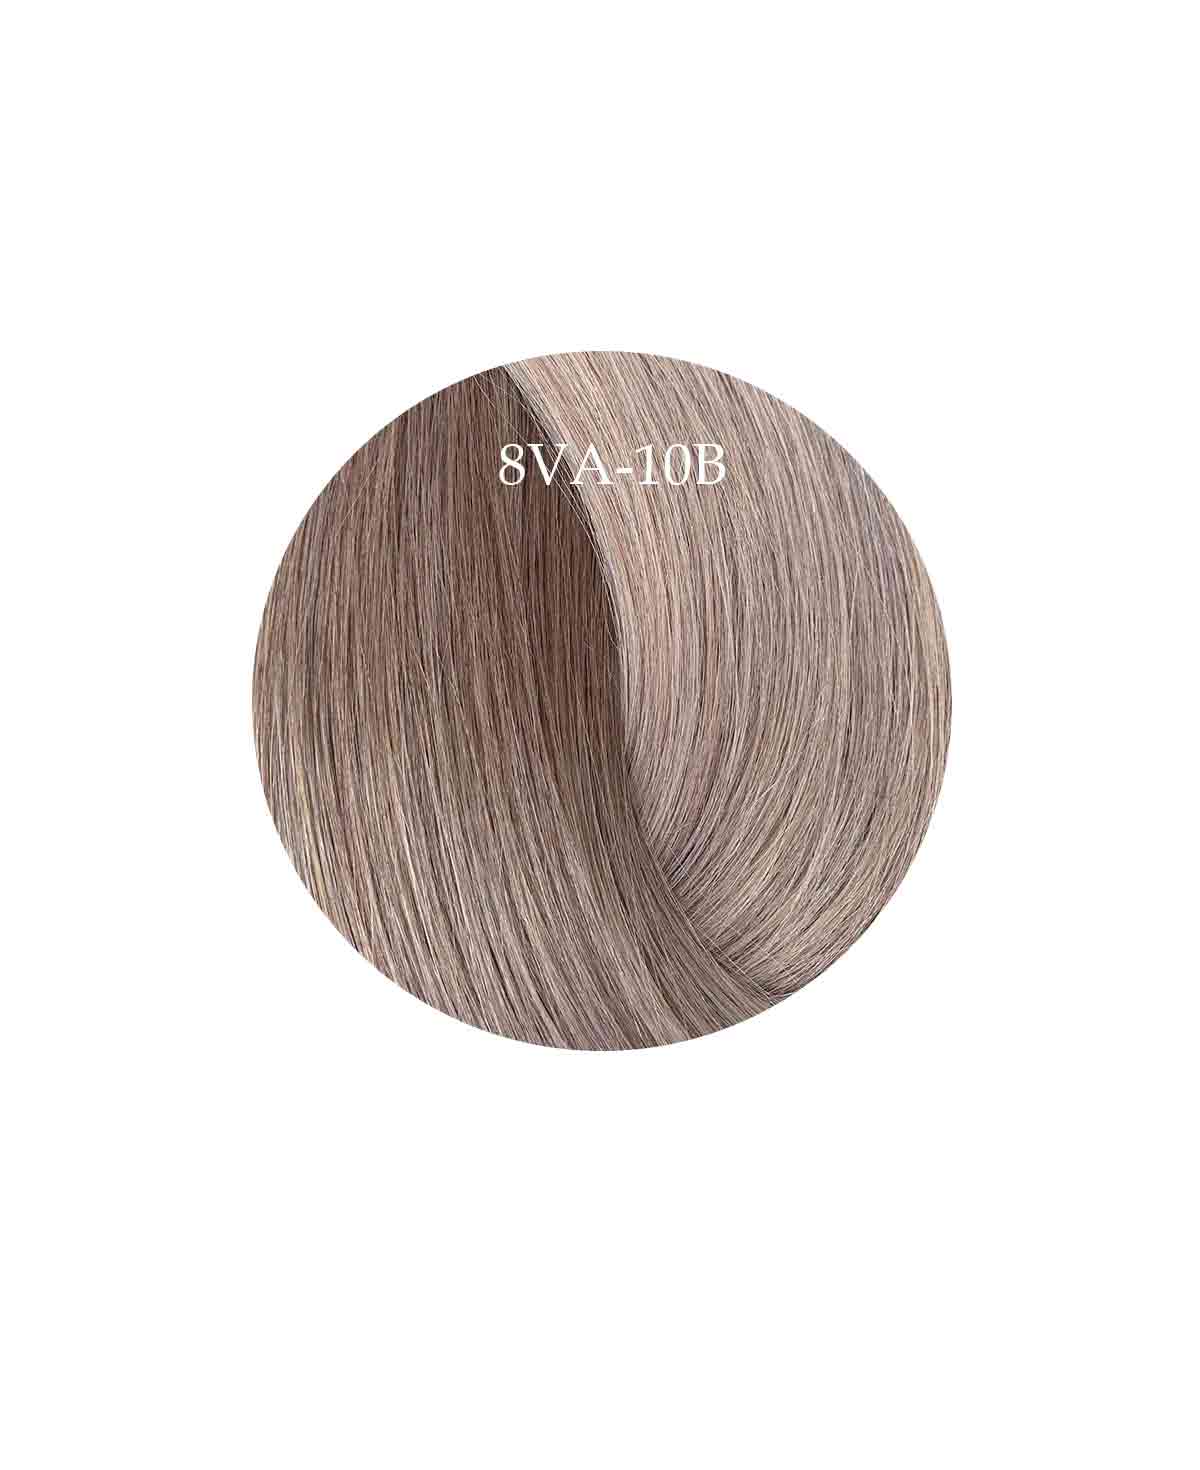 30-35cm (14") SKIN WEFT HAIR-EXTENSIONS - OMBRE WARM COFFEE MELT - 4N-8G